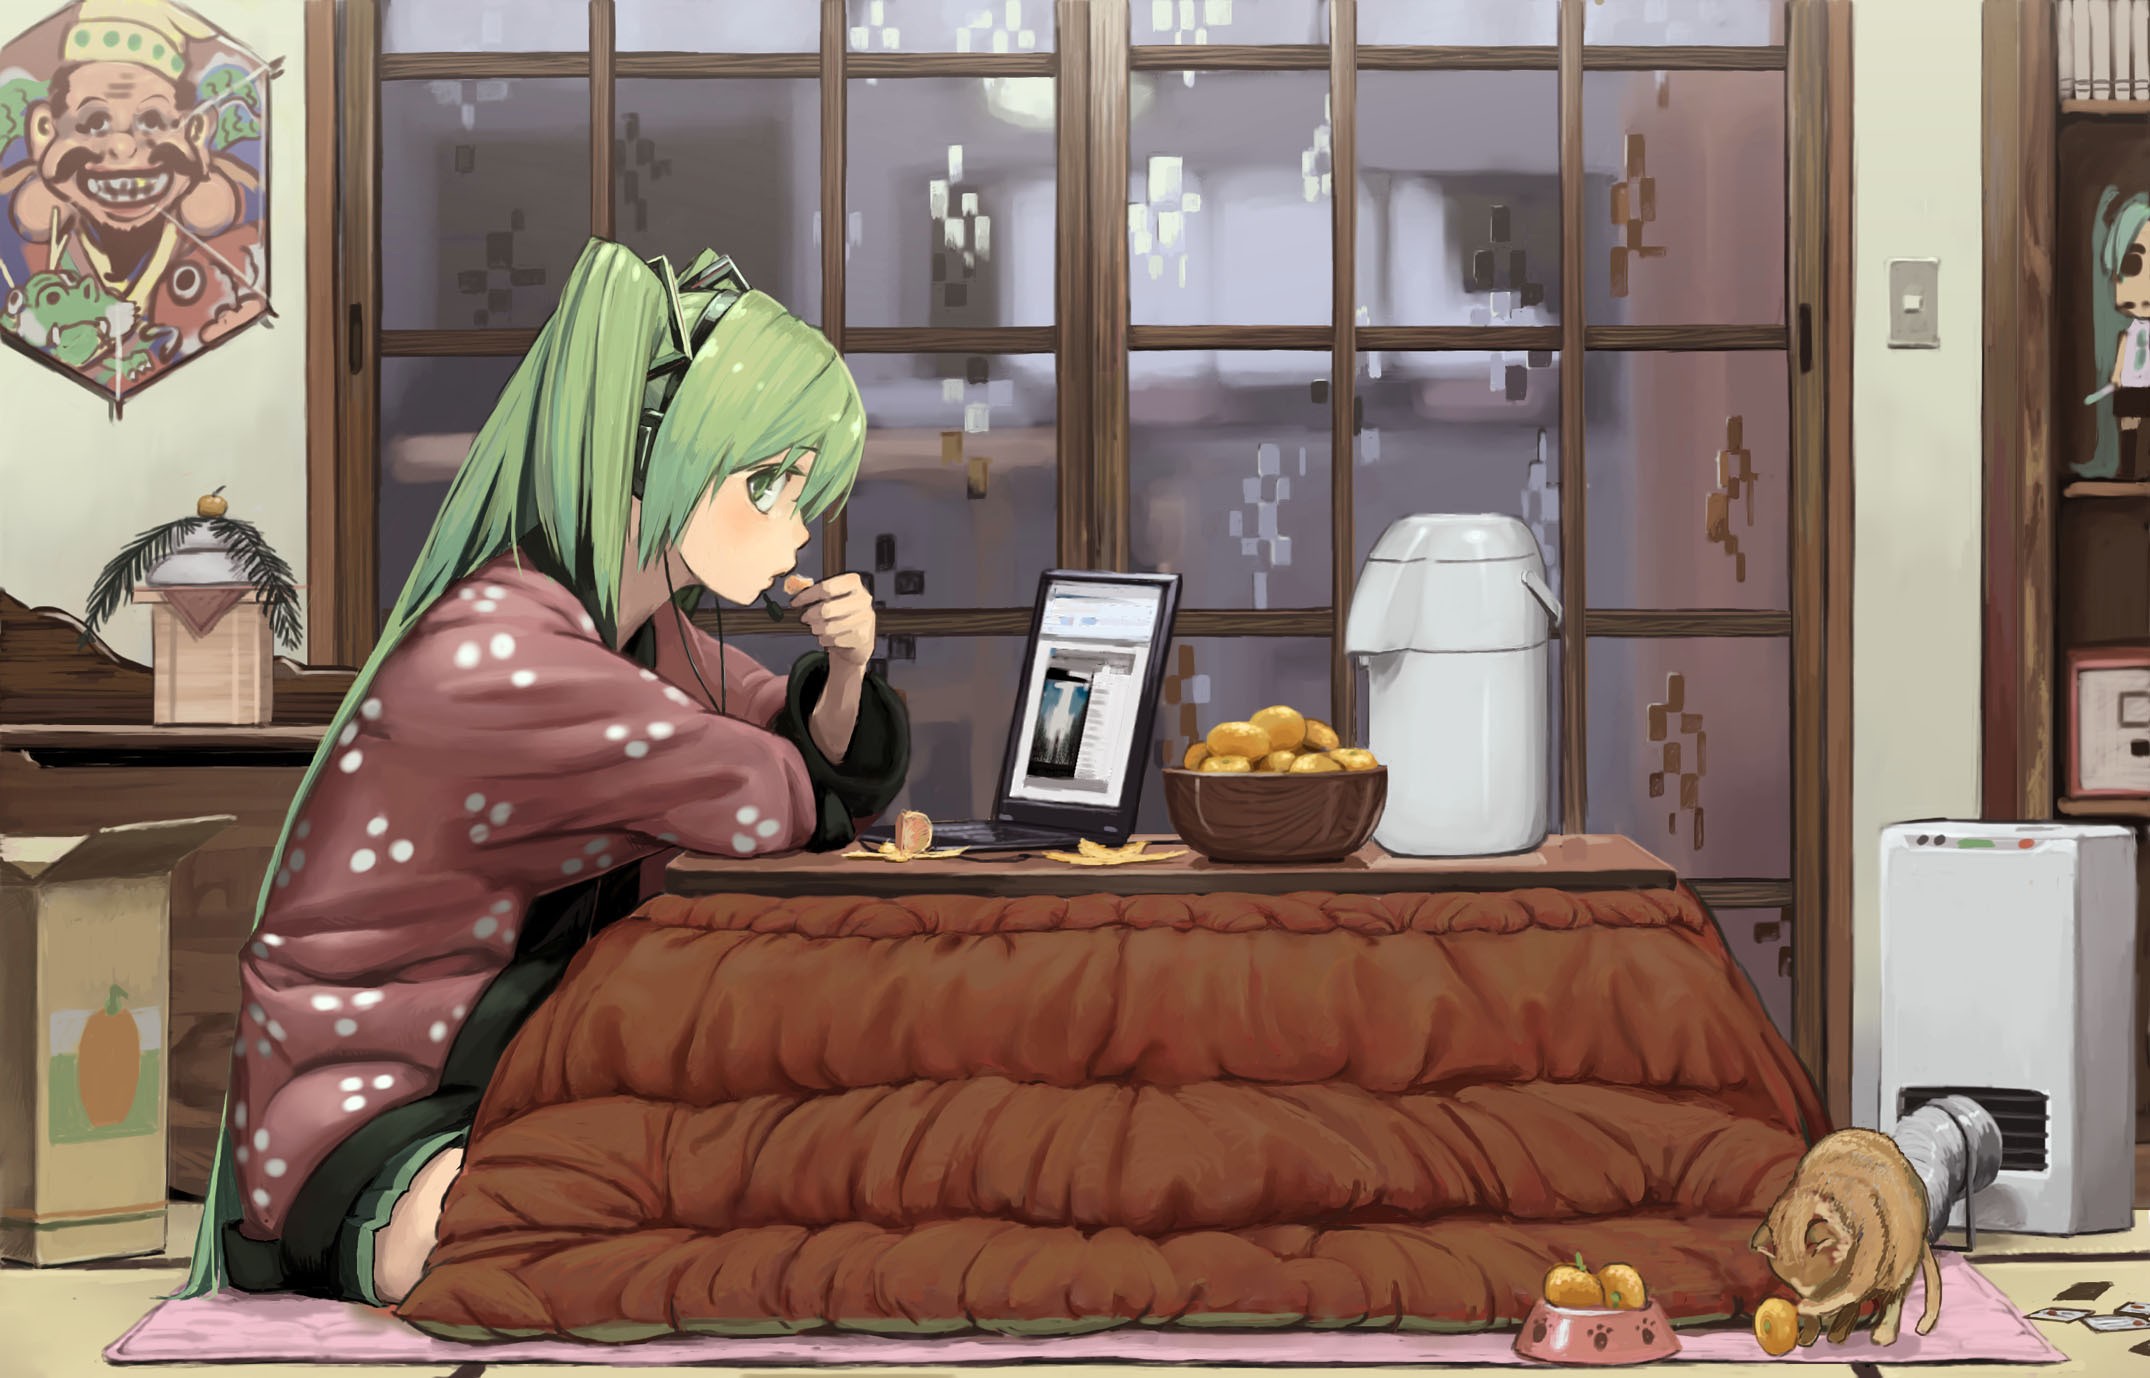 headphones, Computers, Vocaloid, Indoors, Hatsune, Miku, Cats, Animals, Food, Room, Long, Hair, Tables, Green, Eyes, Laptops, Green, Hair, Twintails, Sitting, Anime, Profile, Anime, Girls, Eating, Bangs, Headset Wallpaper